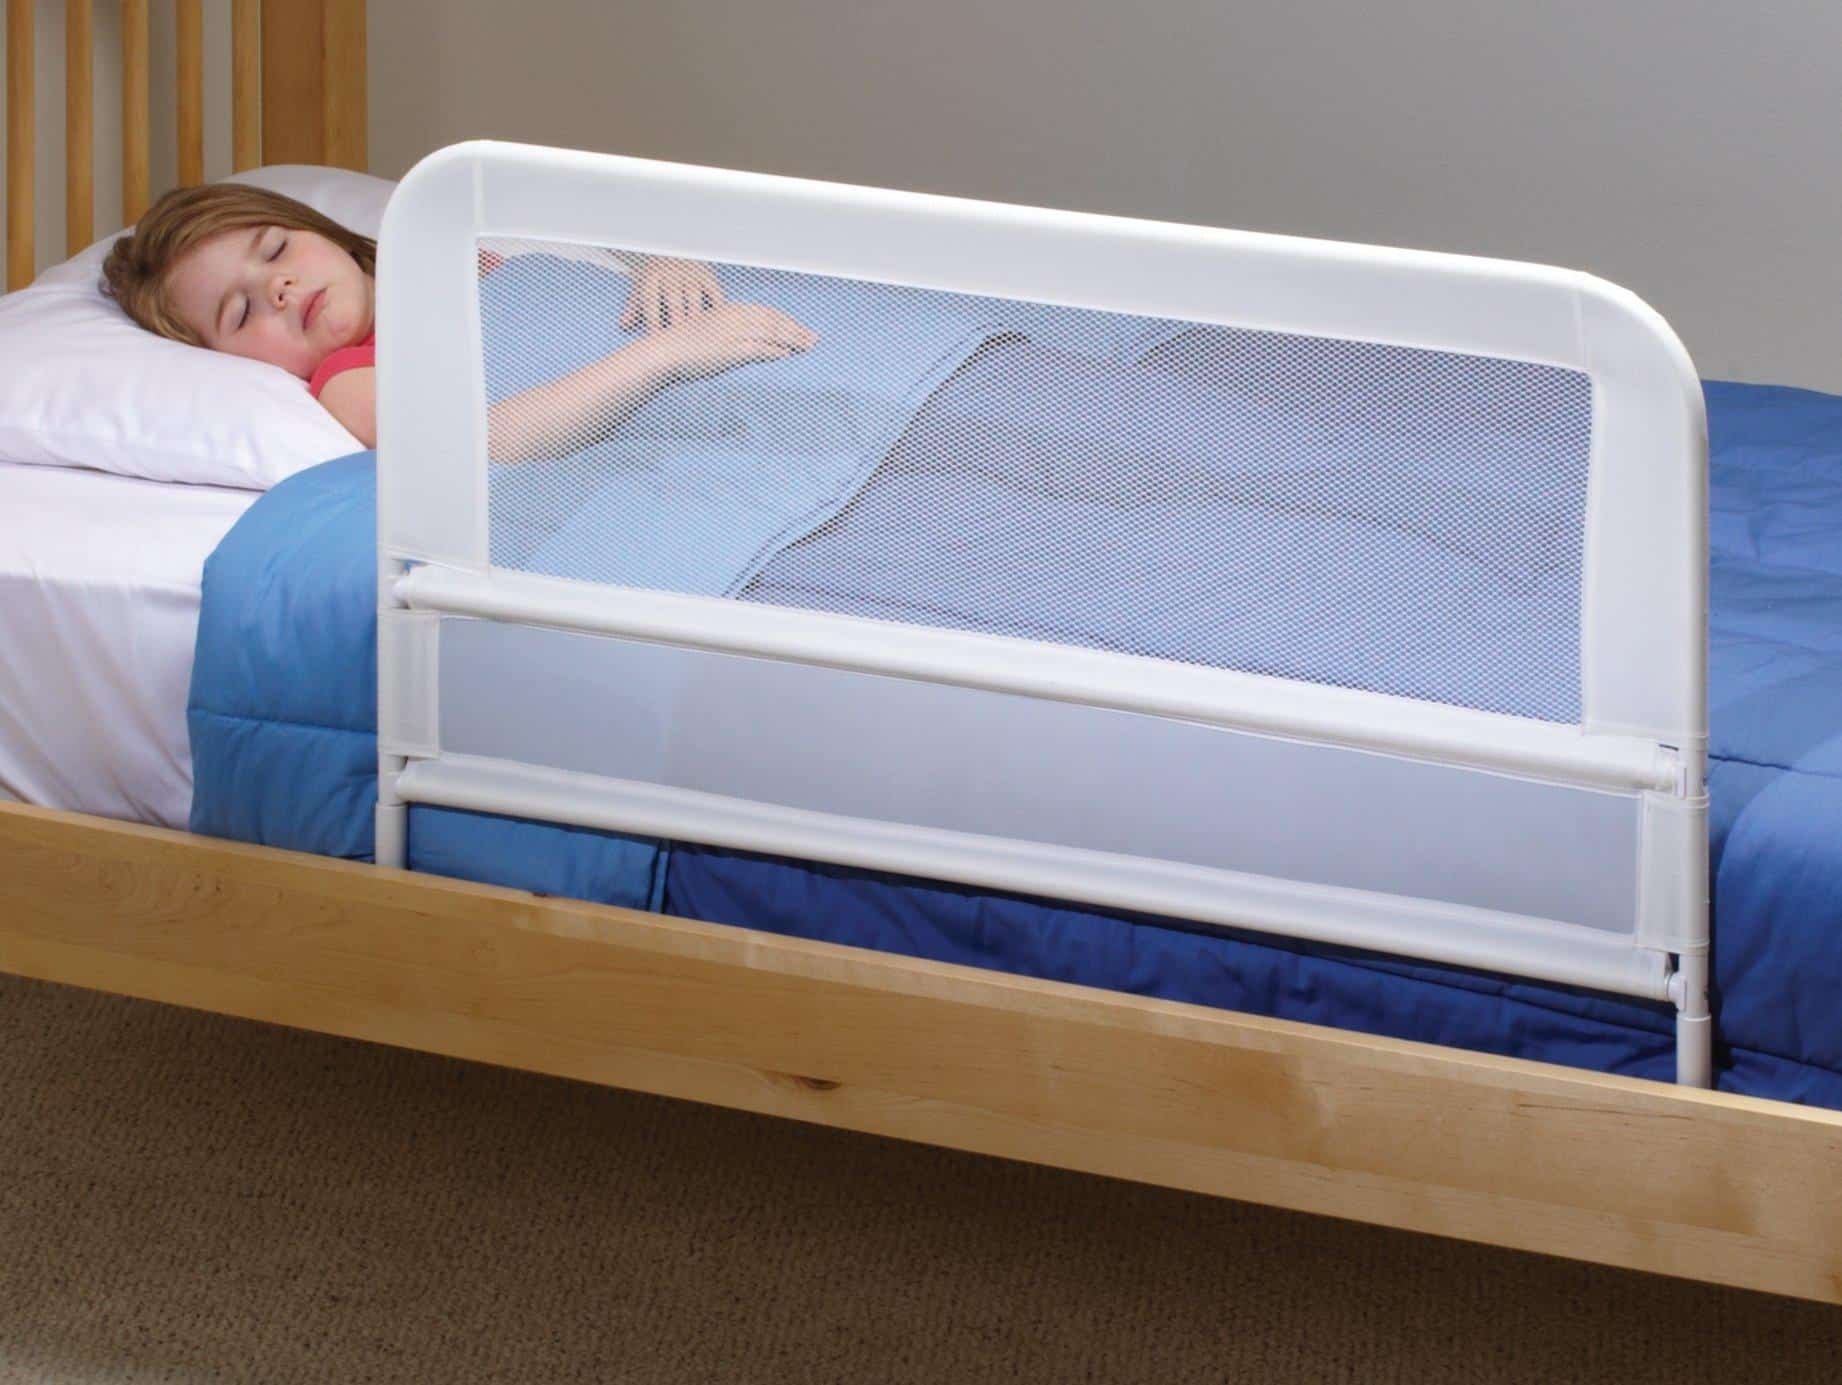 safety bed rails for king size bed